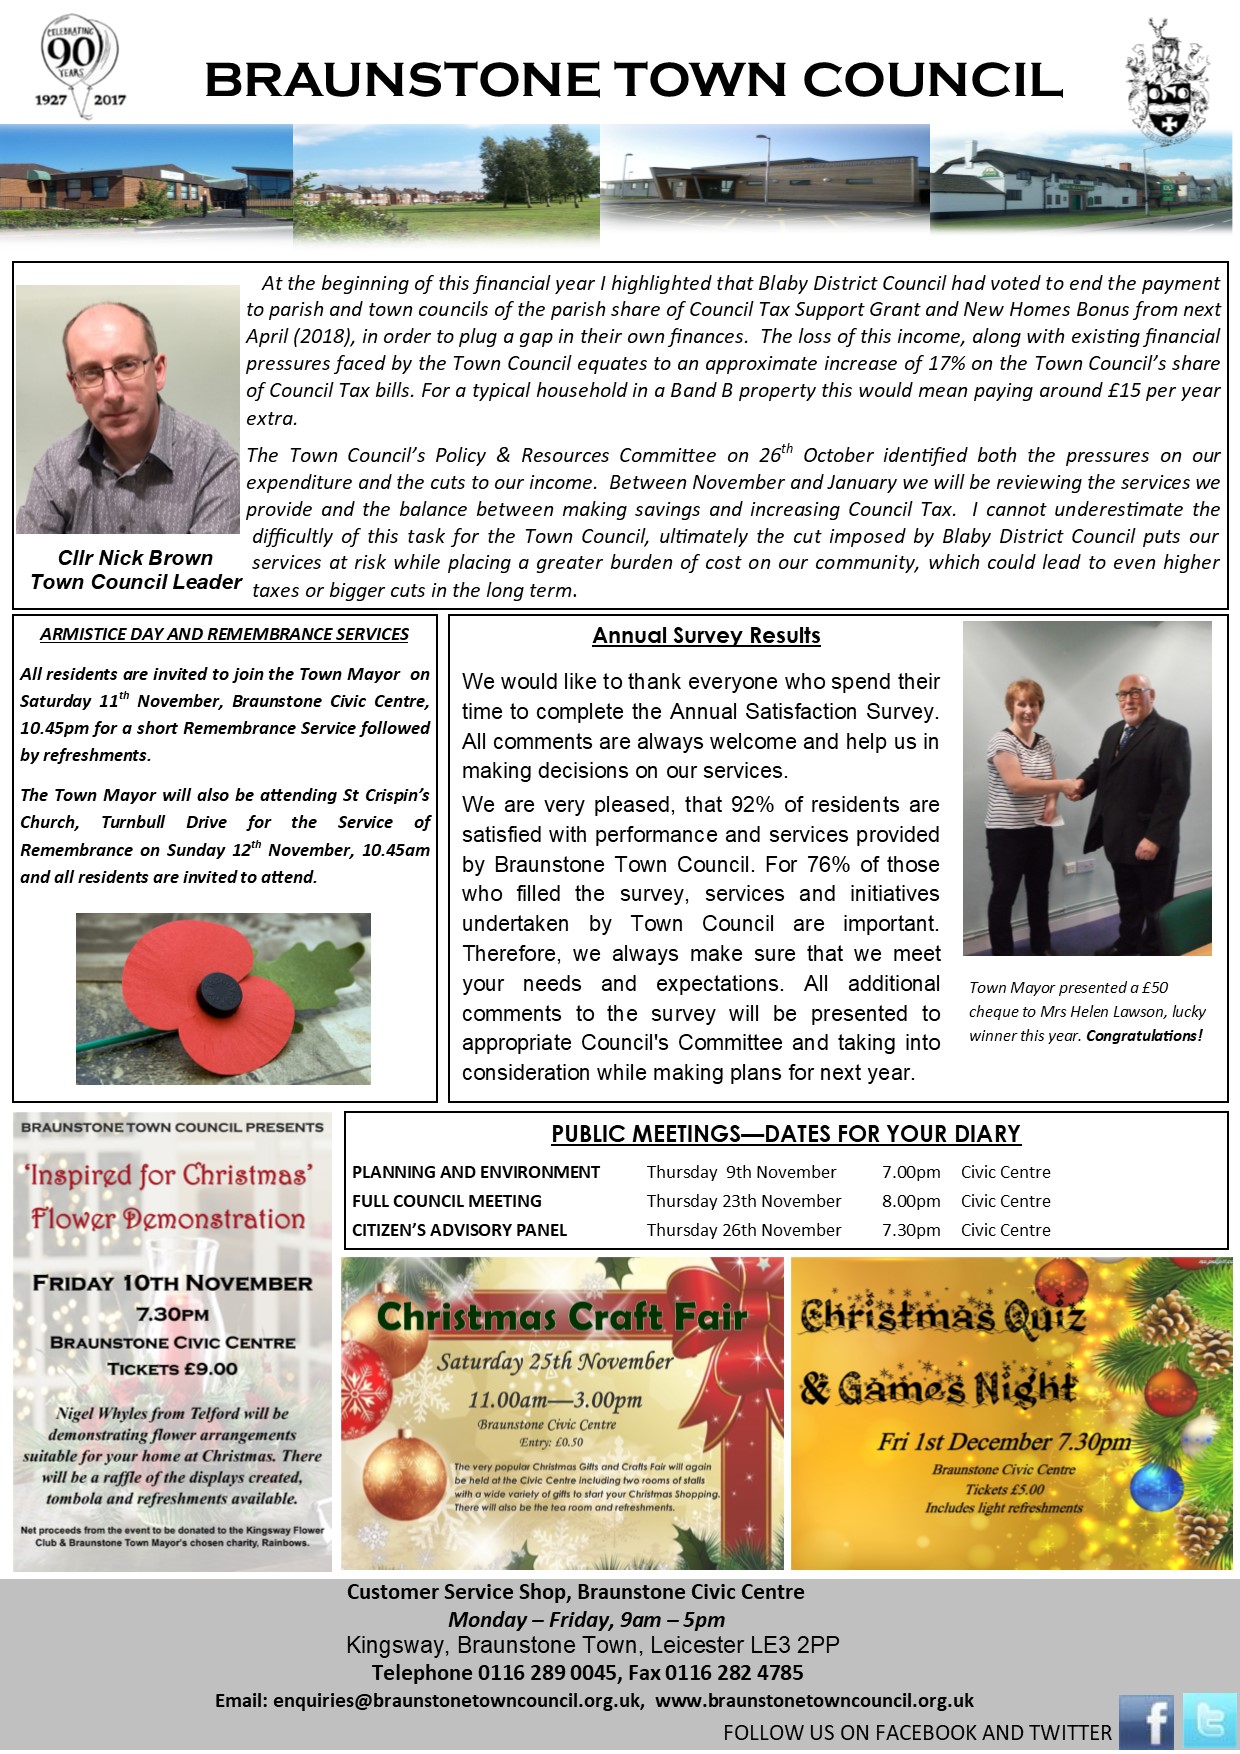 The Town Council article from the November 2017 issue of the Braunstone Life